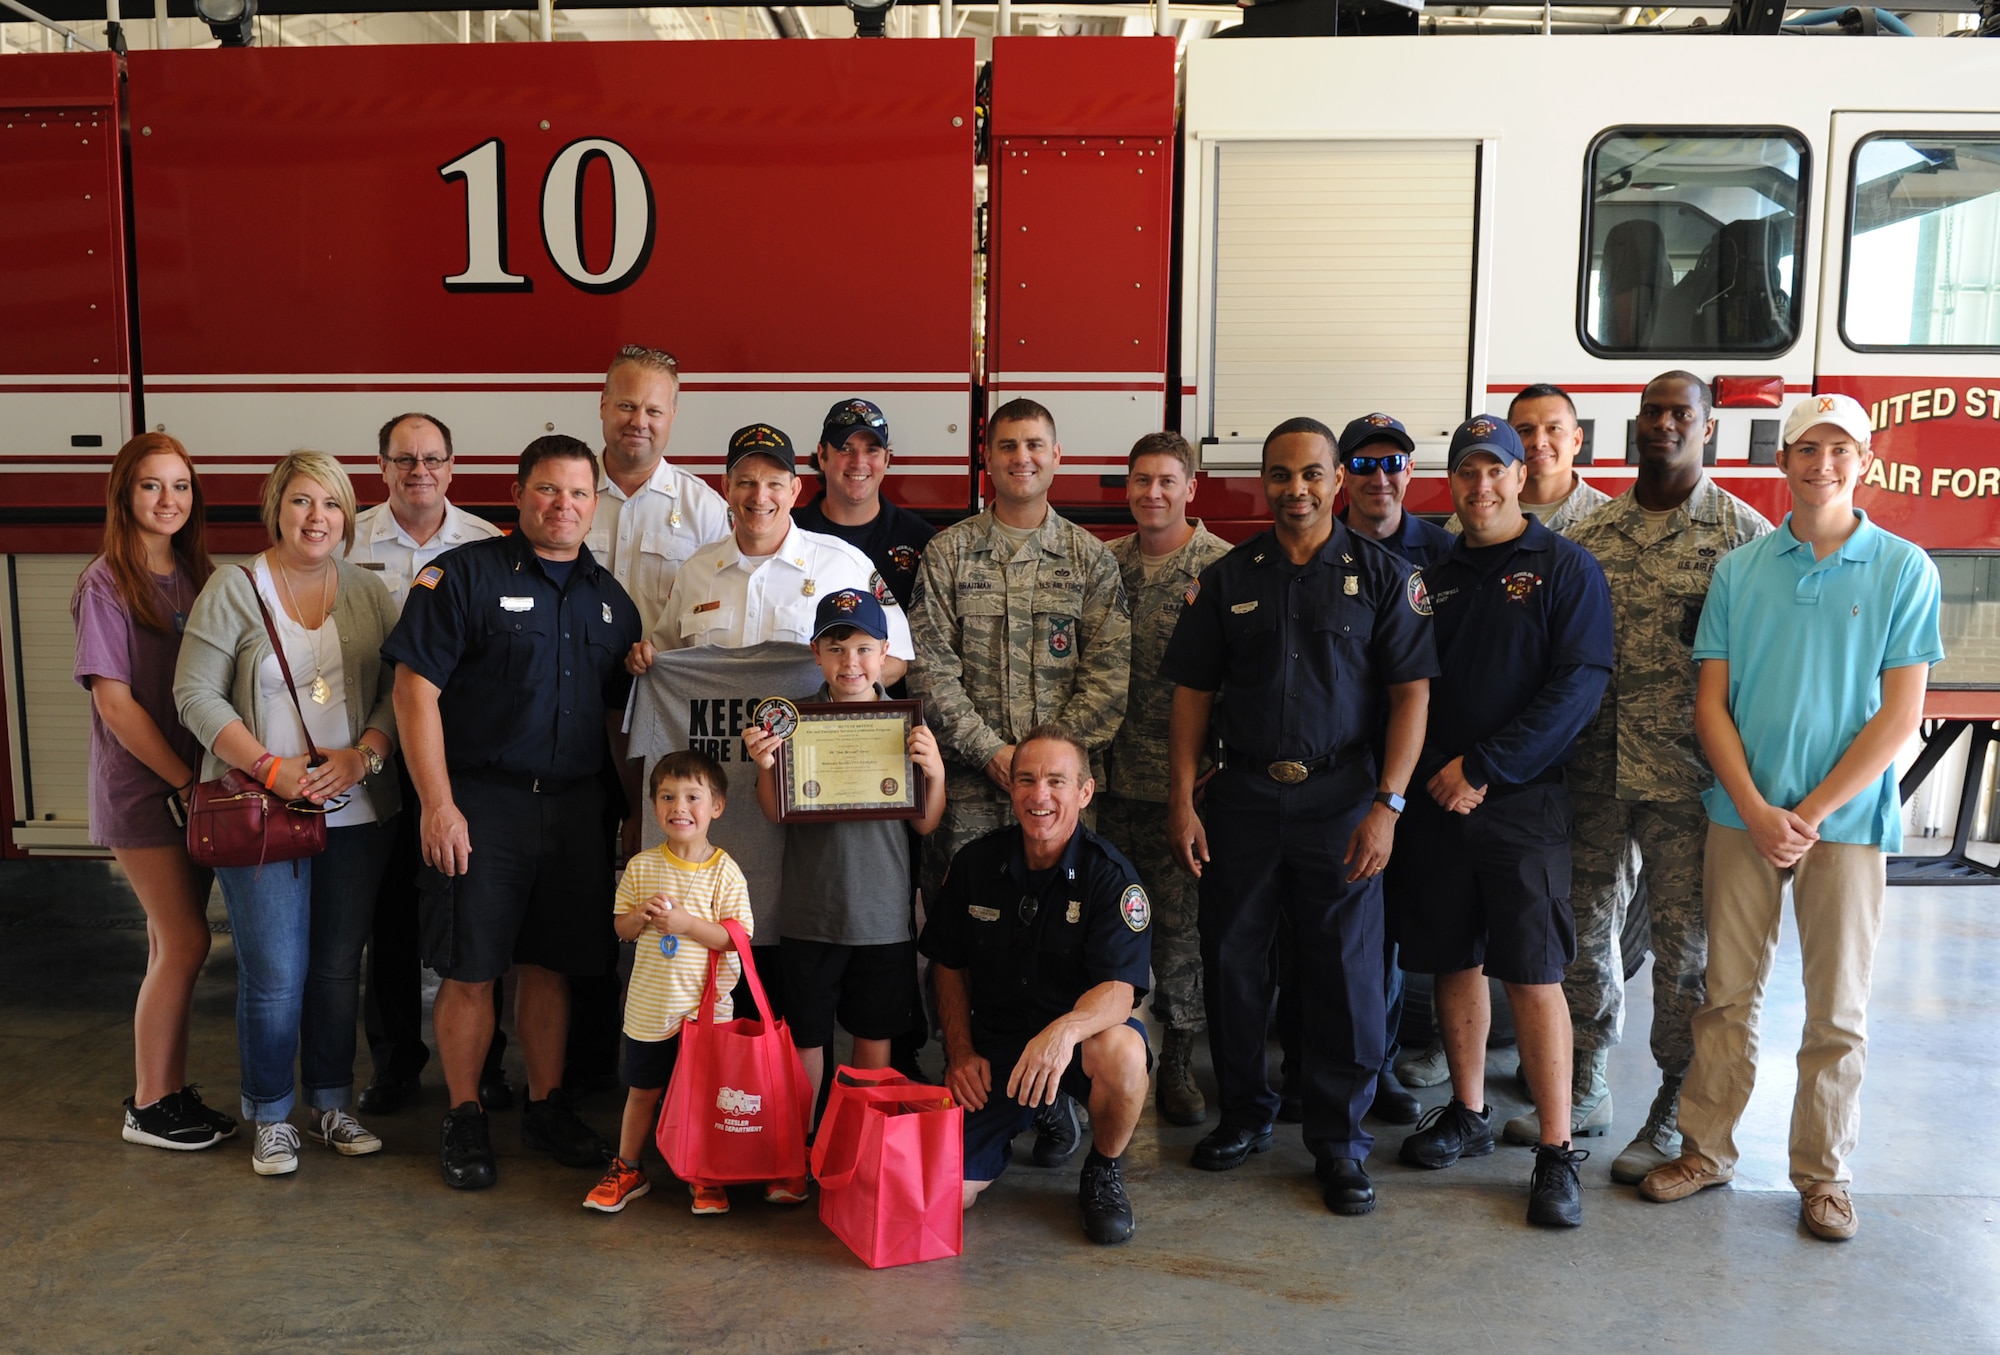 Jon Bryant “JB” Orso poses for a photo while touring the Keesler Fire Department during the 403rd Wing’s first Pilot for a Day event April 26, 2016, Keesler Air Force Base, Miss. Orso, who served as an honorary Air Force Reserve second lieutenant, is in remission after receiving treatment for Acute Lymphoblastic Leukemia. Pilot for a Day is a community outreach program for children with a chronic or life-threatening disease or illness. (U.S. Air Force photo by Kemberly Groue)